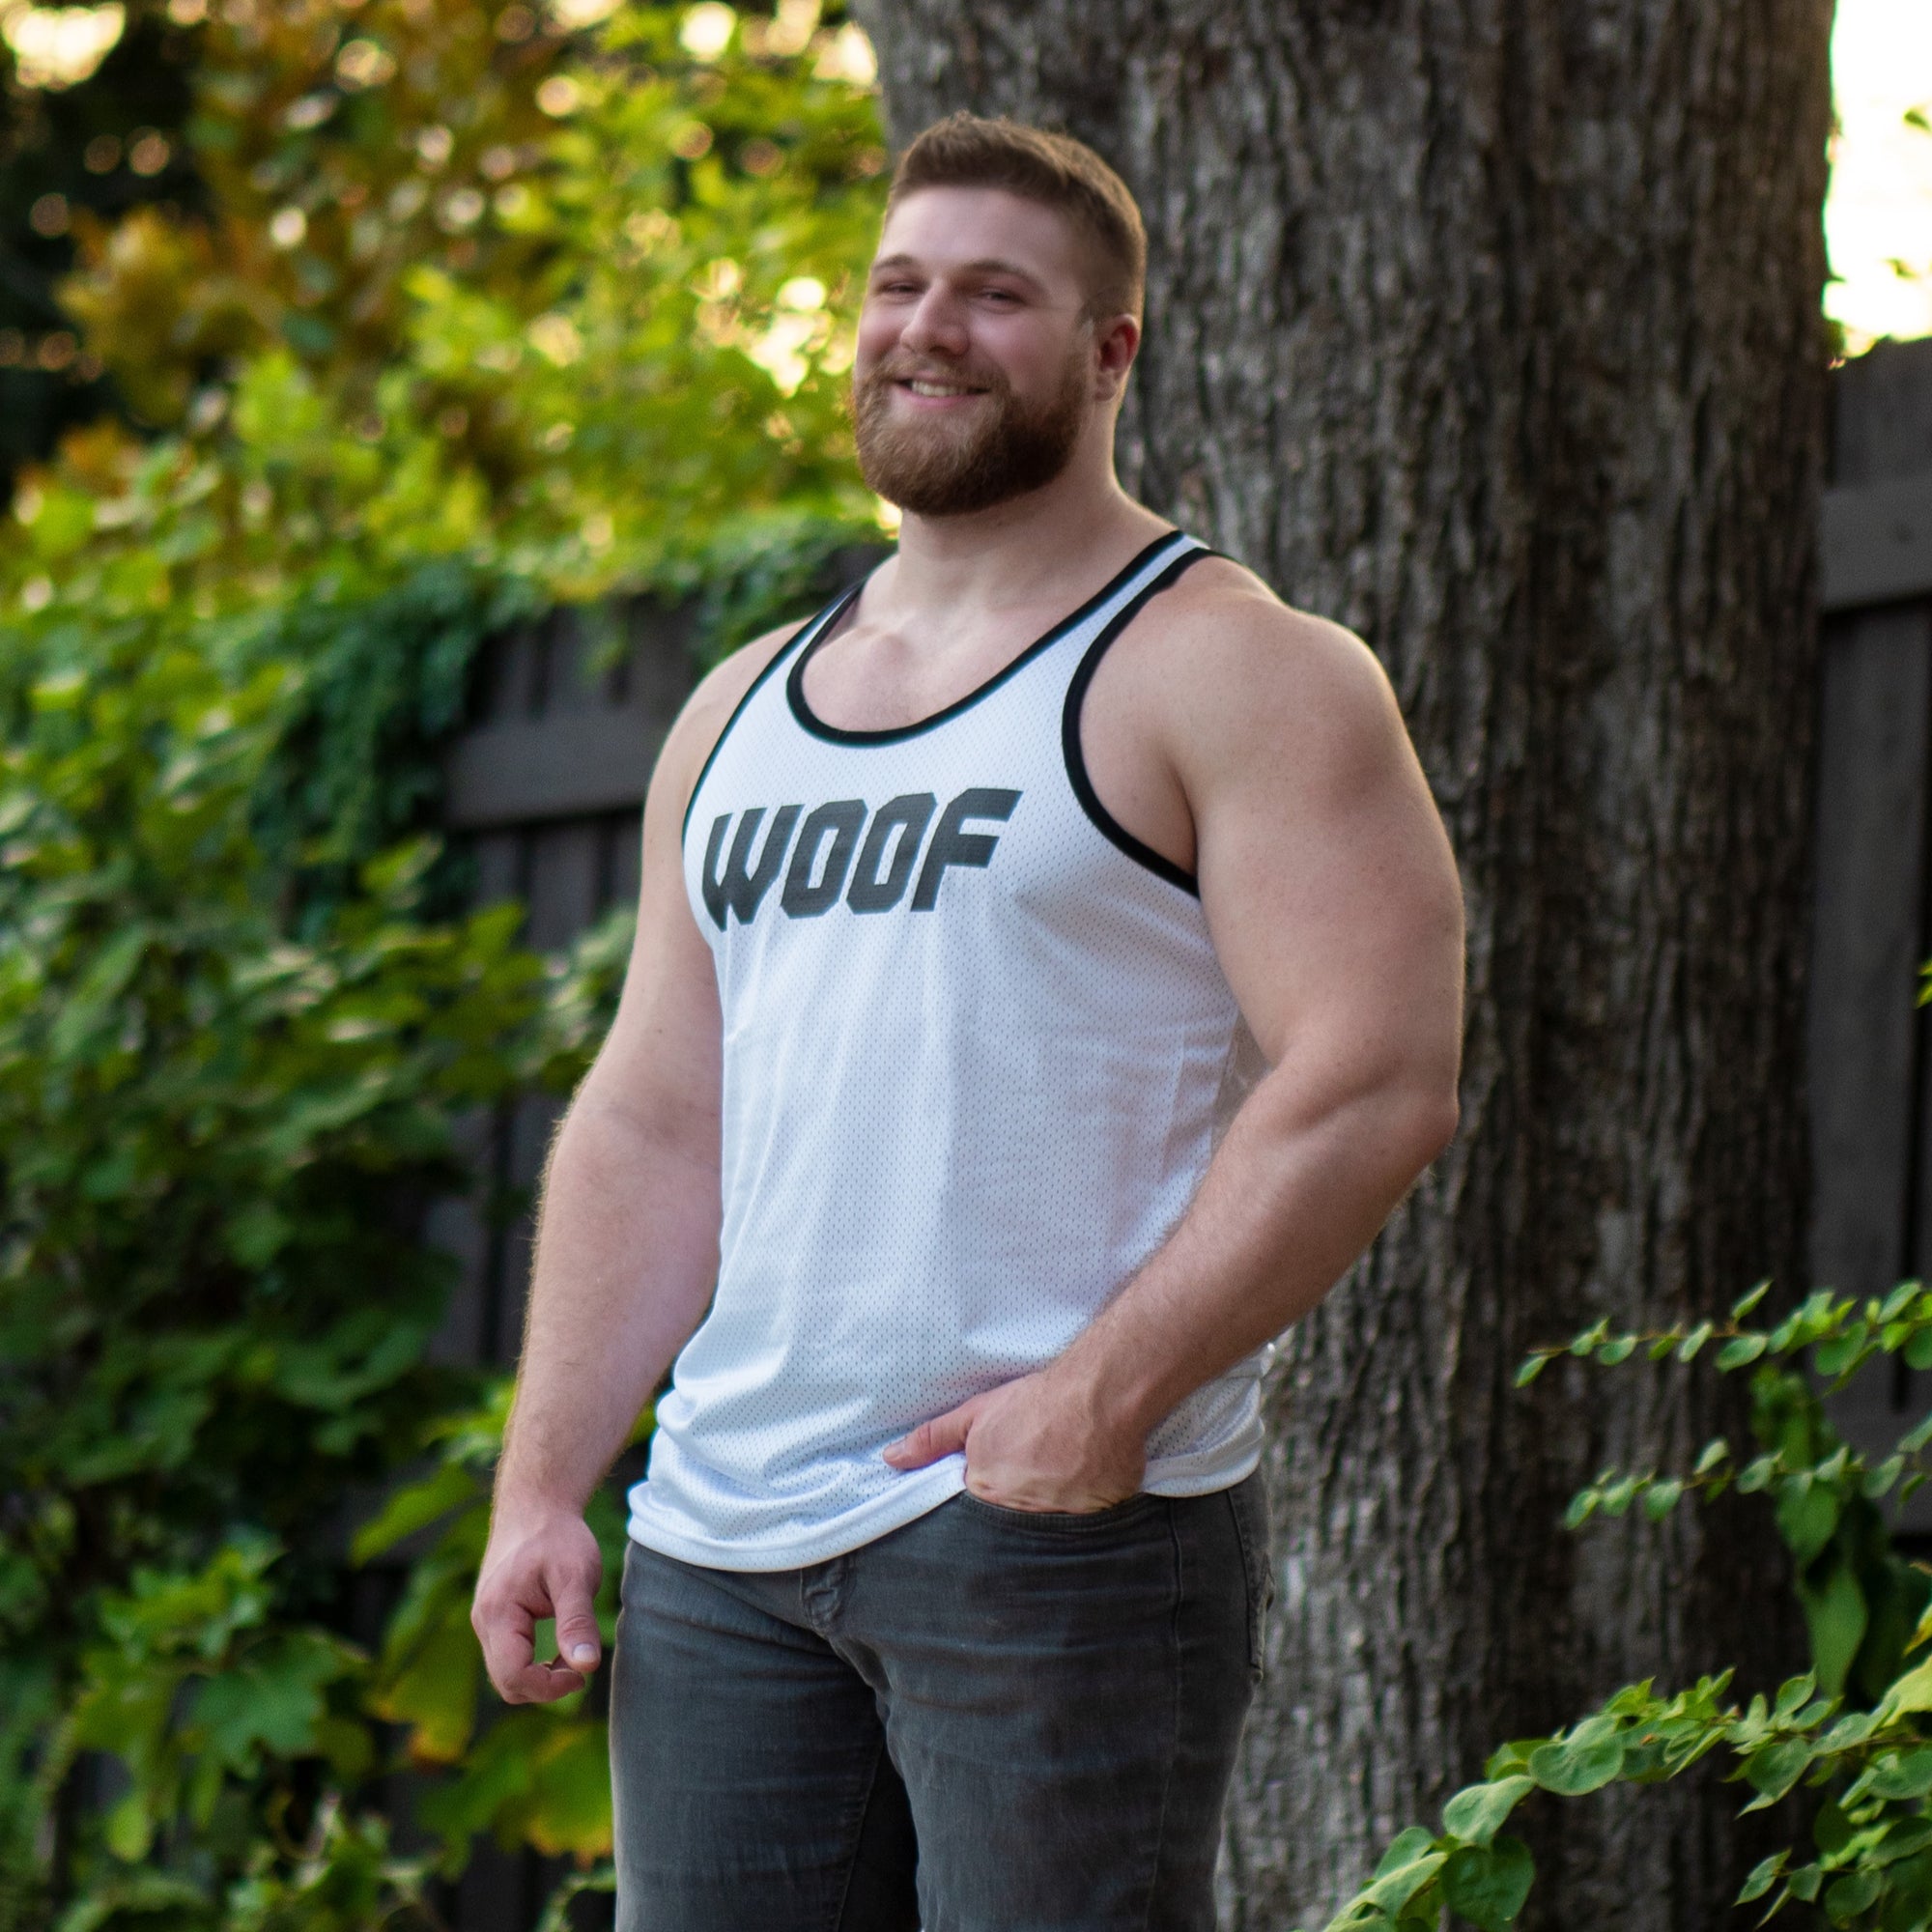 woof-black -> The Woof Air Tank in Black, featuring a very handsome Riley